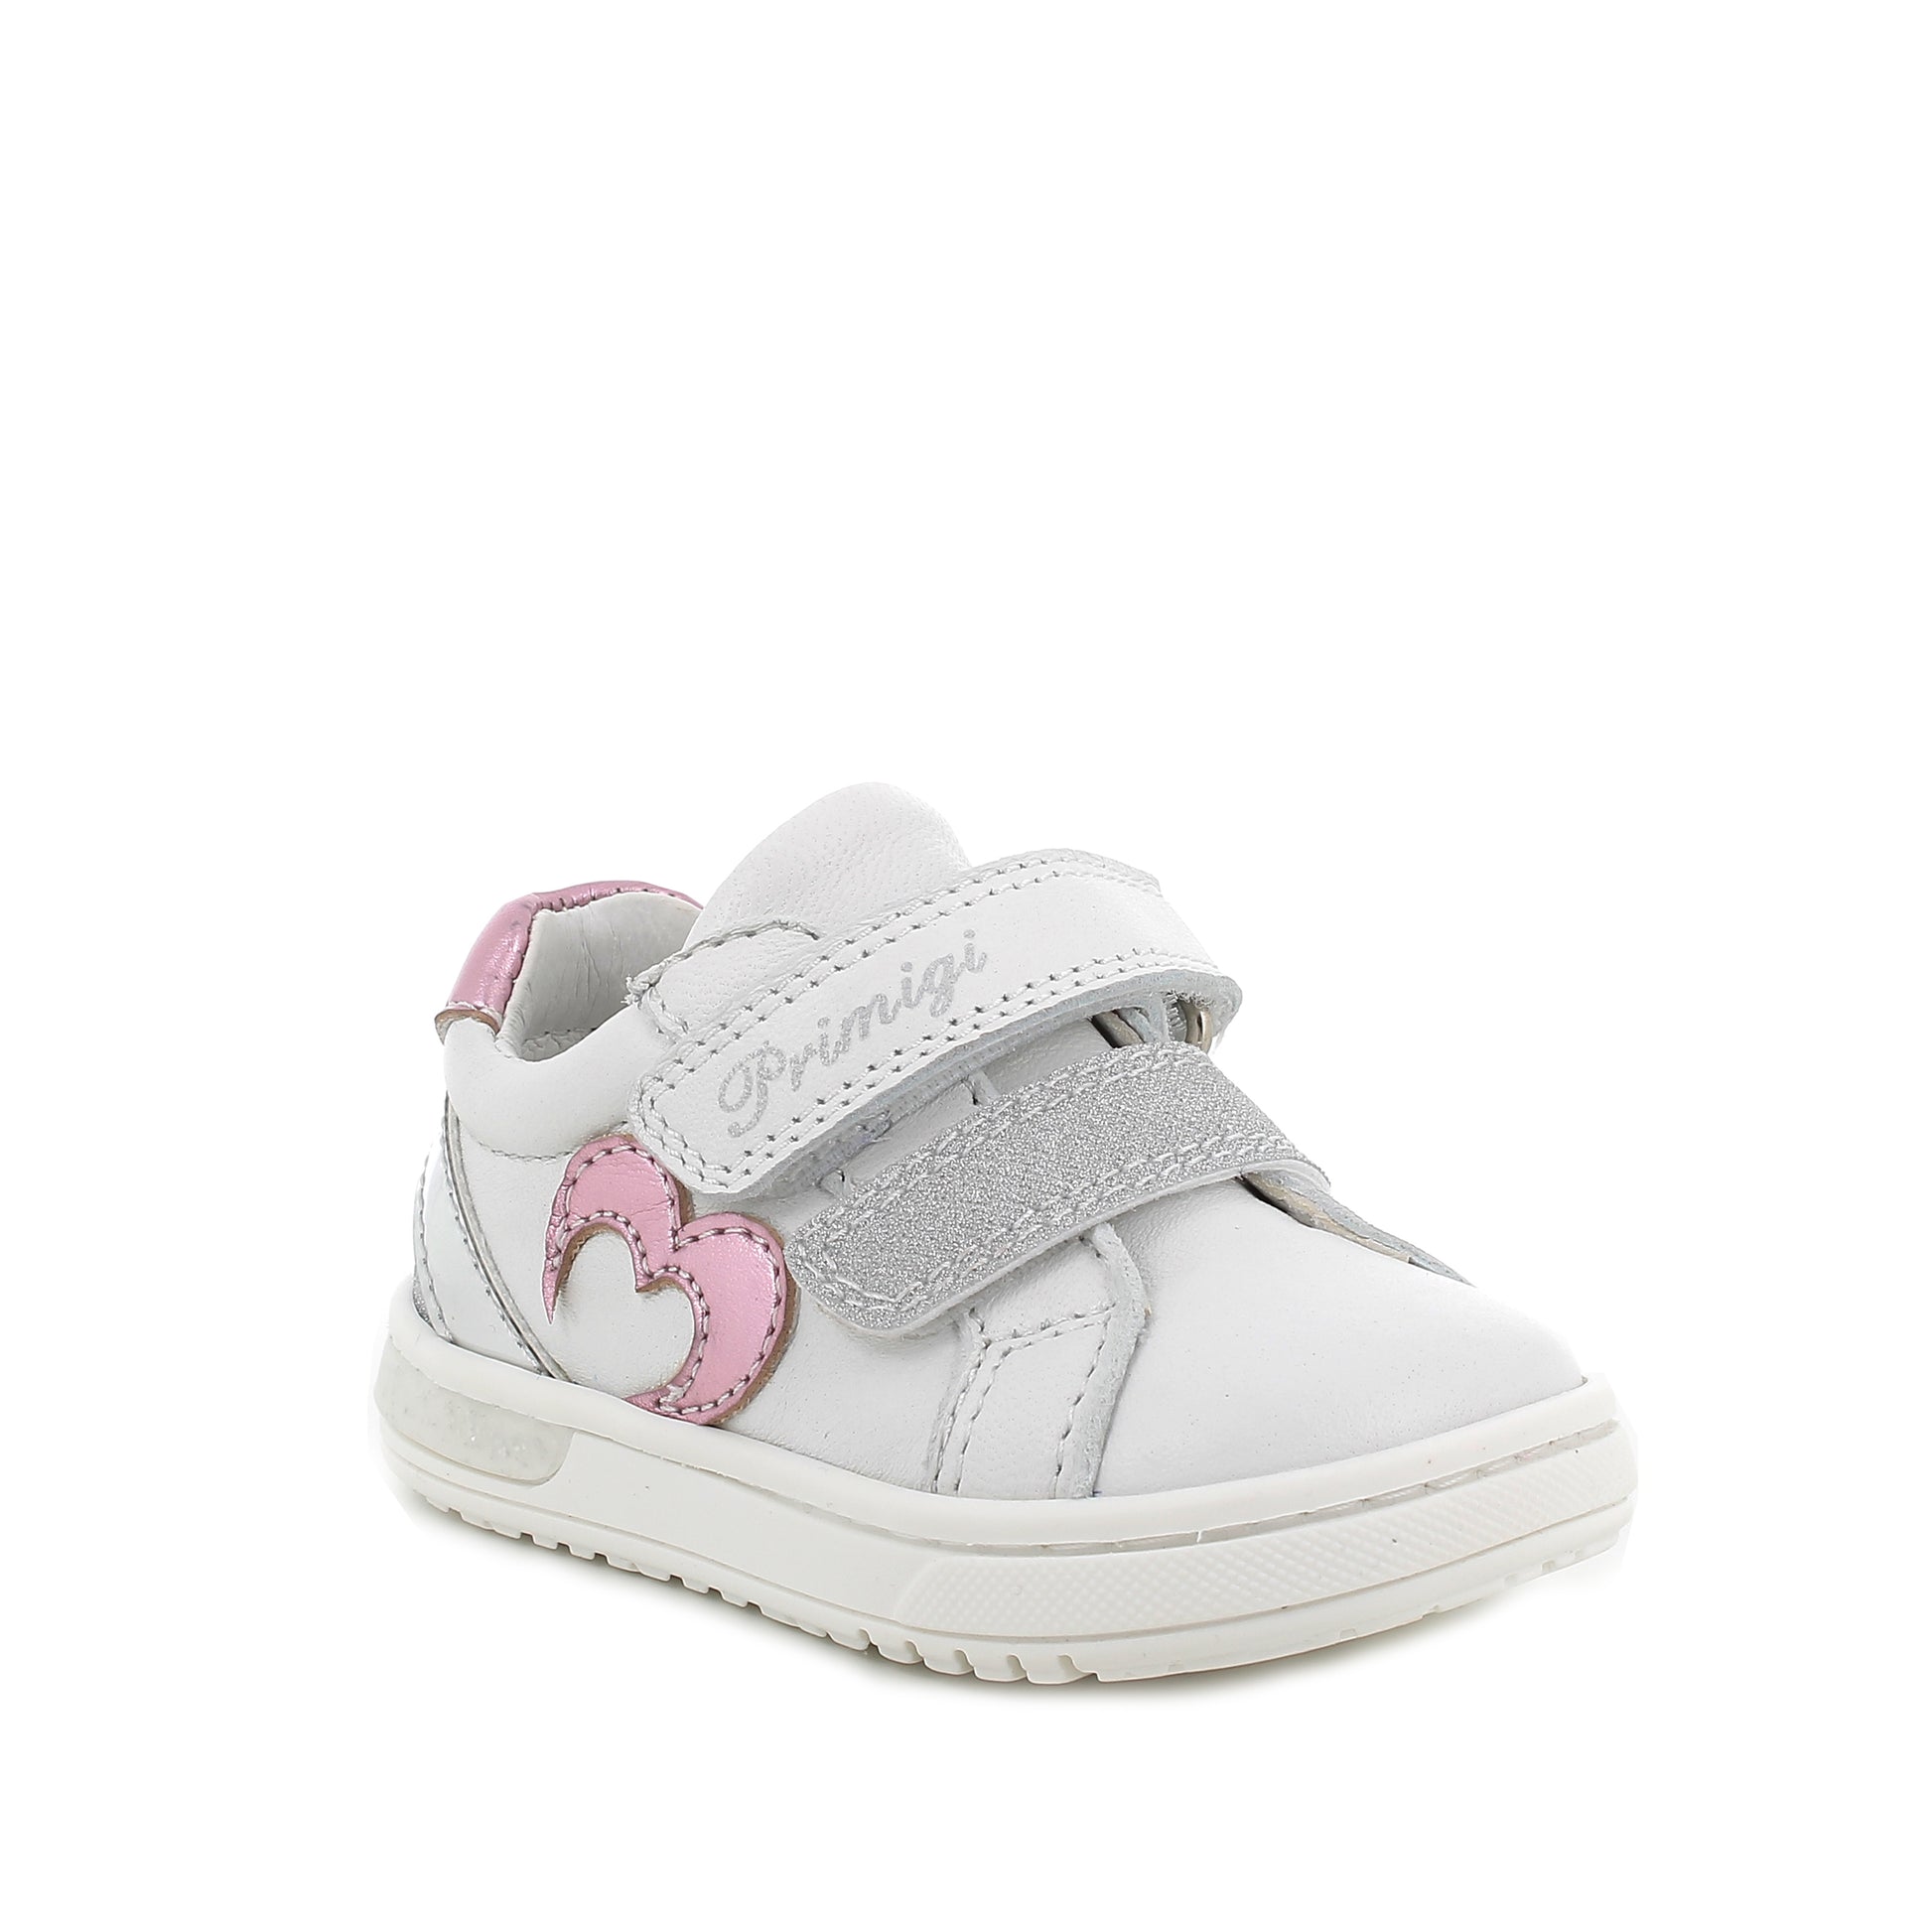 A girls casual shoe by Primigi, style Baby Dude 5905222, in white, pink and silver leather with double velcro fastening. Angled view.